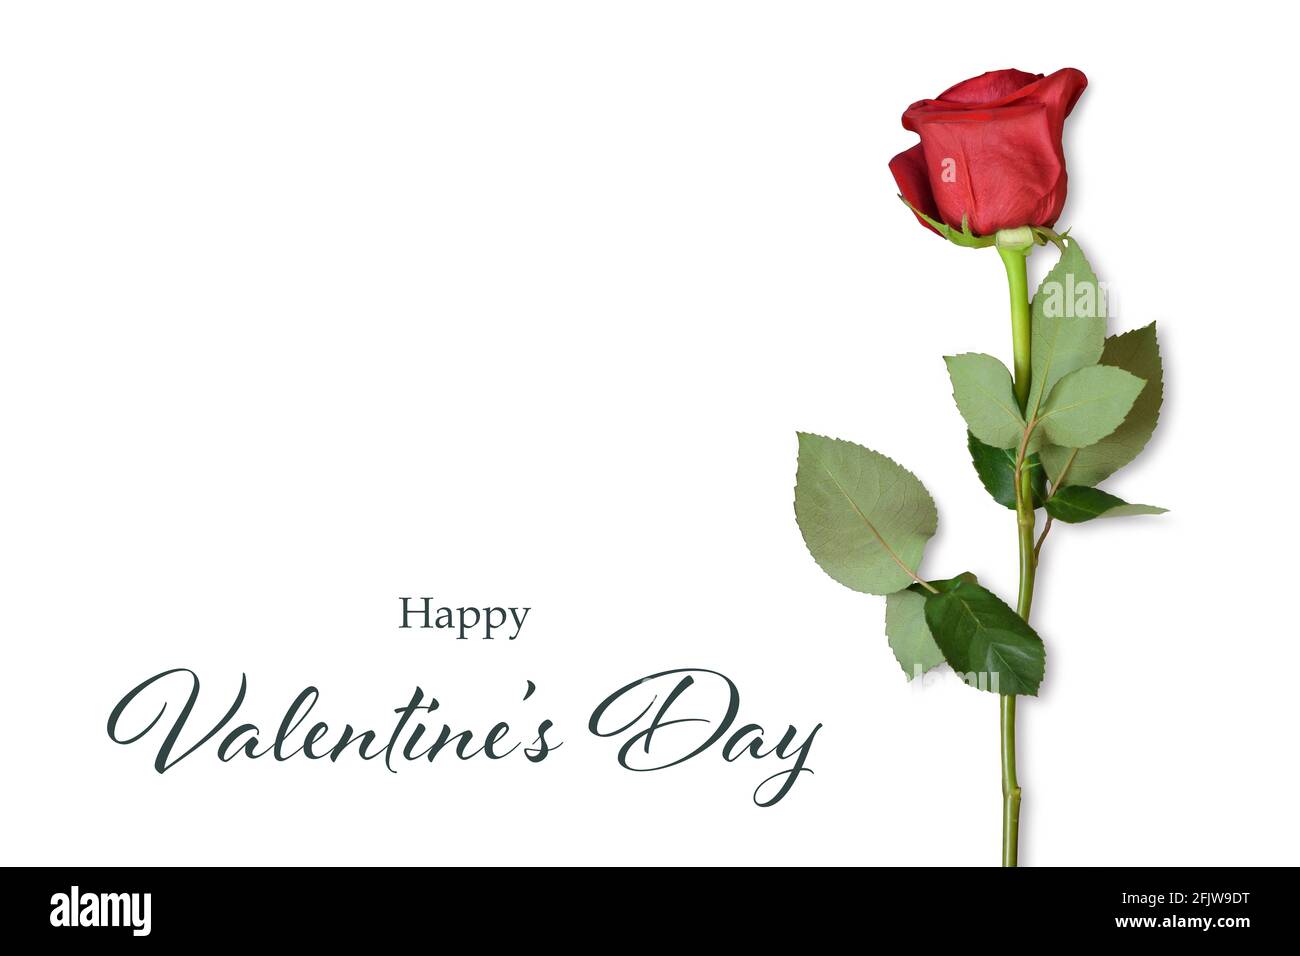 Happy Valentines Day card with single red rose isolated on white background  Stock Photo - Alamy